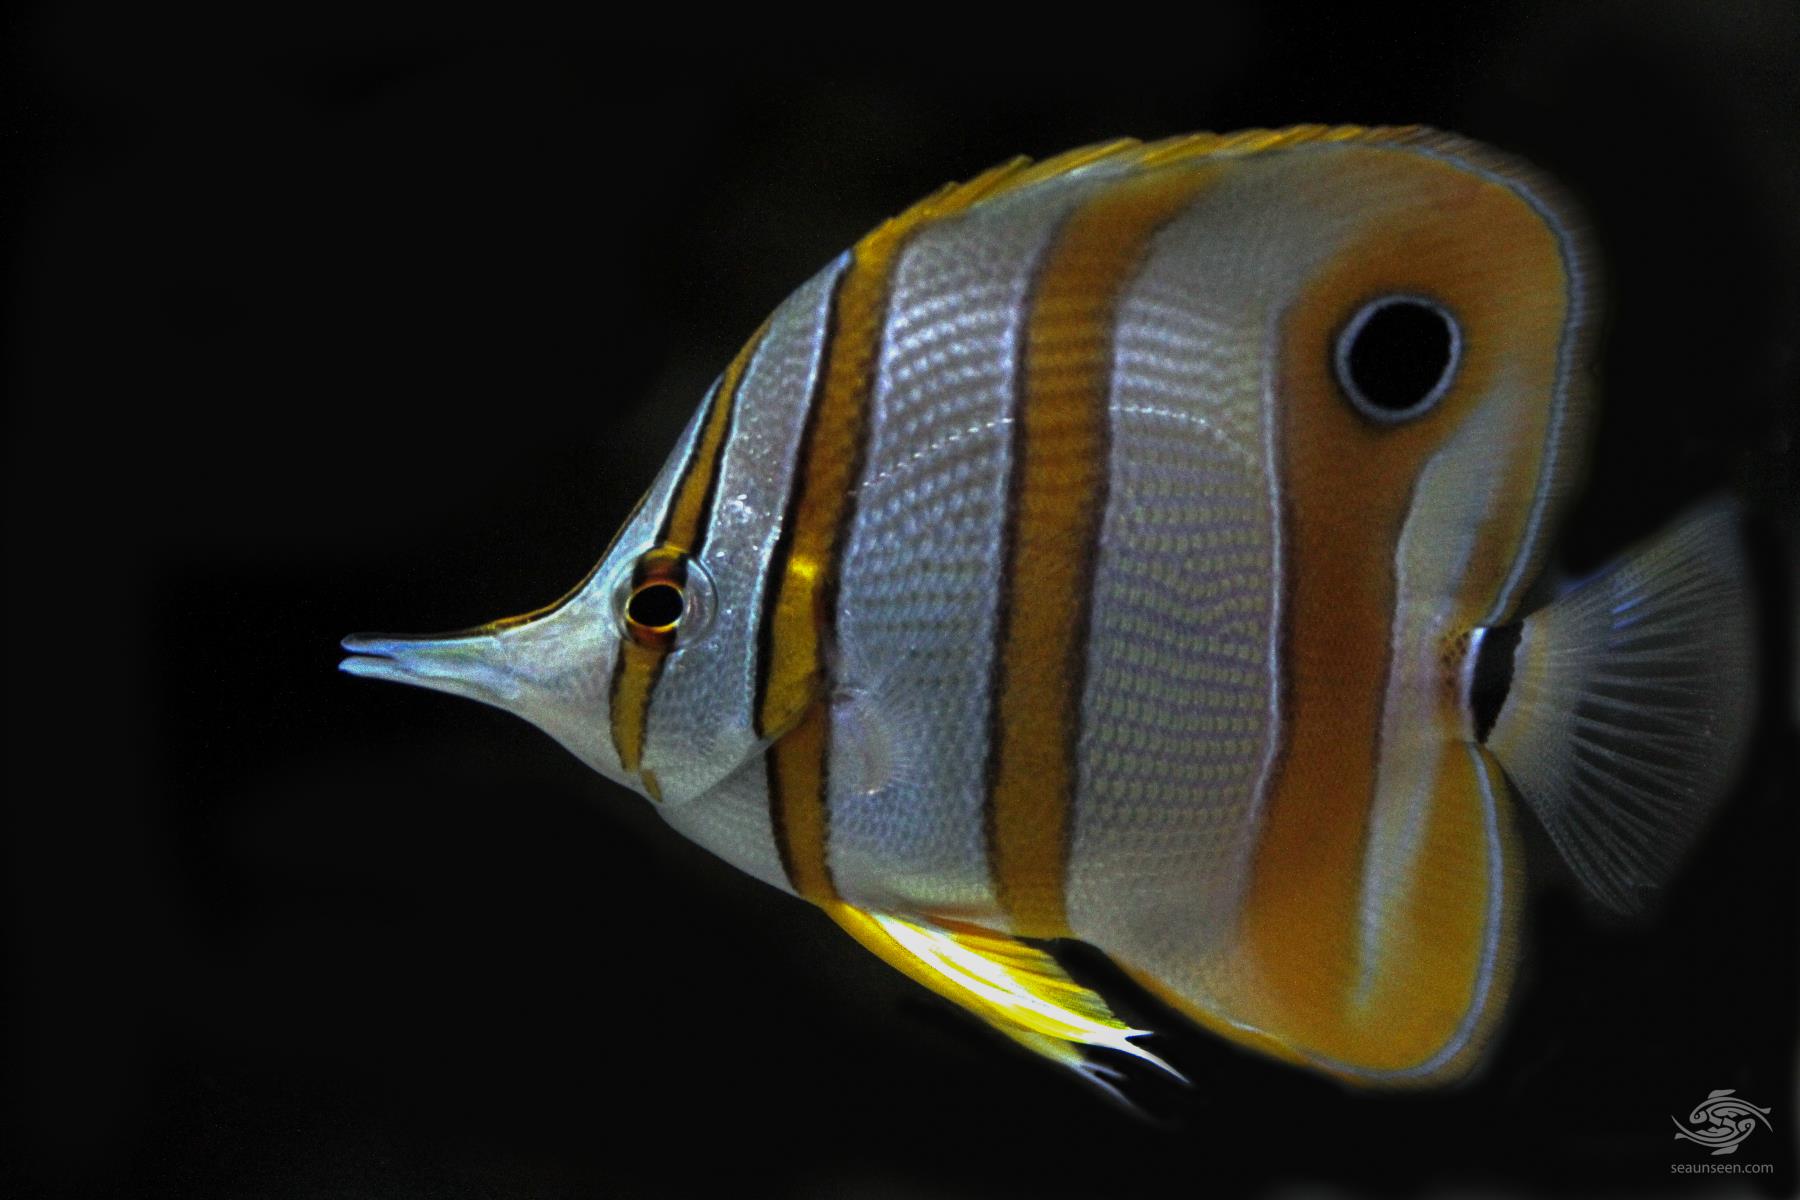 Copperband butterflyfish - Facts and Photographs - Seaunseen